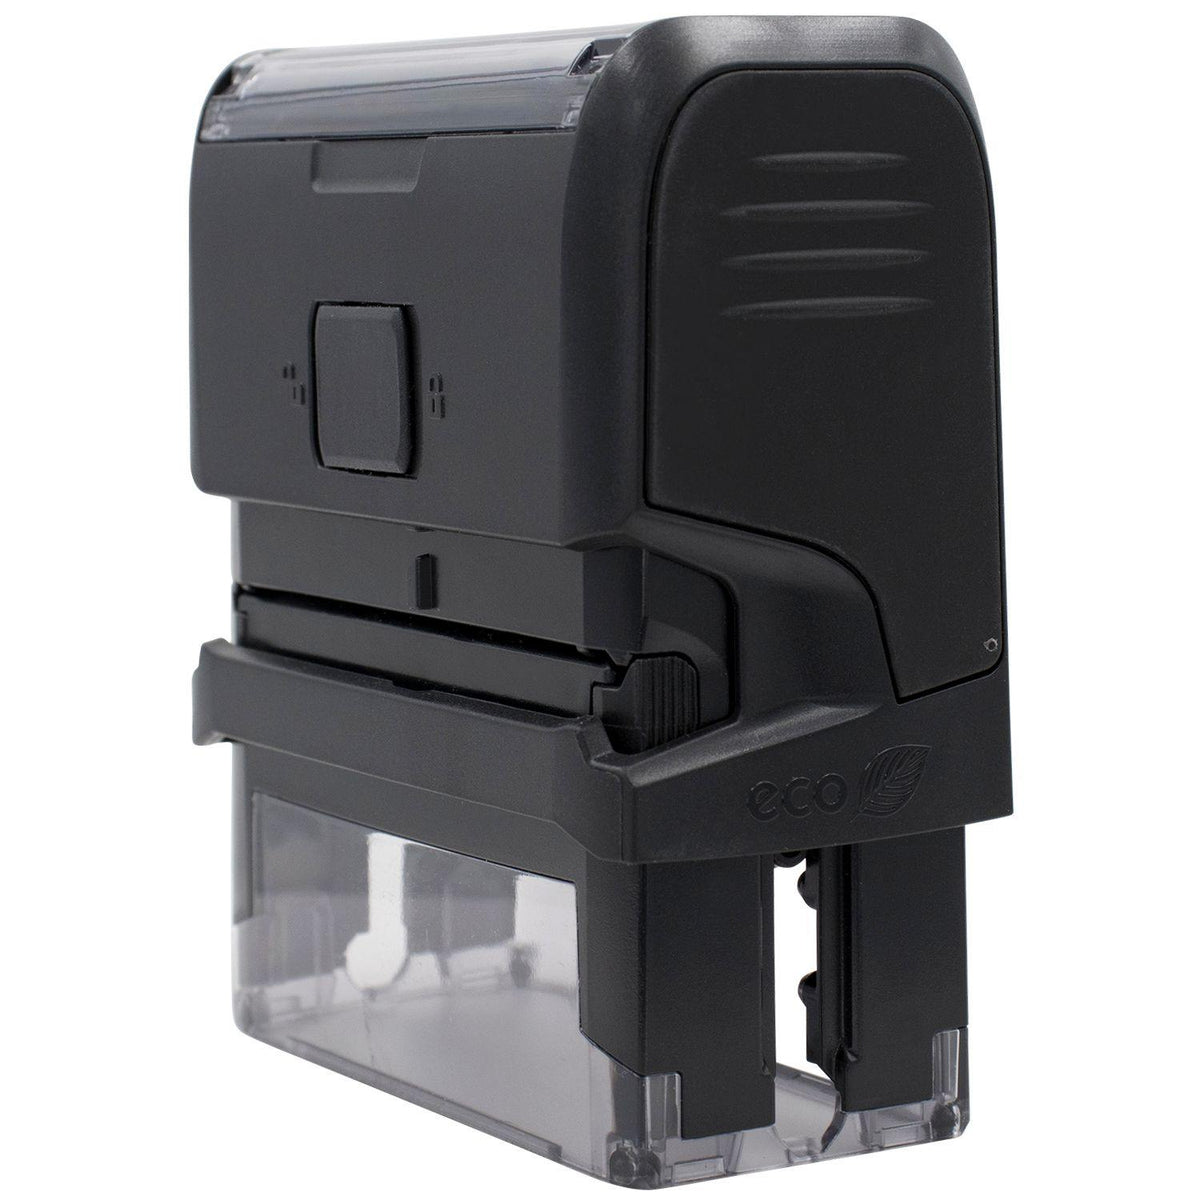 Large Self-Inking Office Copy Stamp - Engineer Seal Stamps - Brand_Trodat, Impression Size_Large, Stamp Type_Self-Inking Stamp, Type of Use_Office